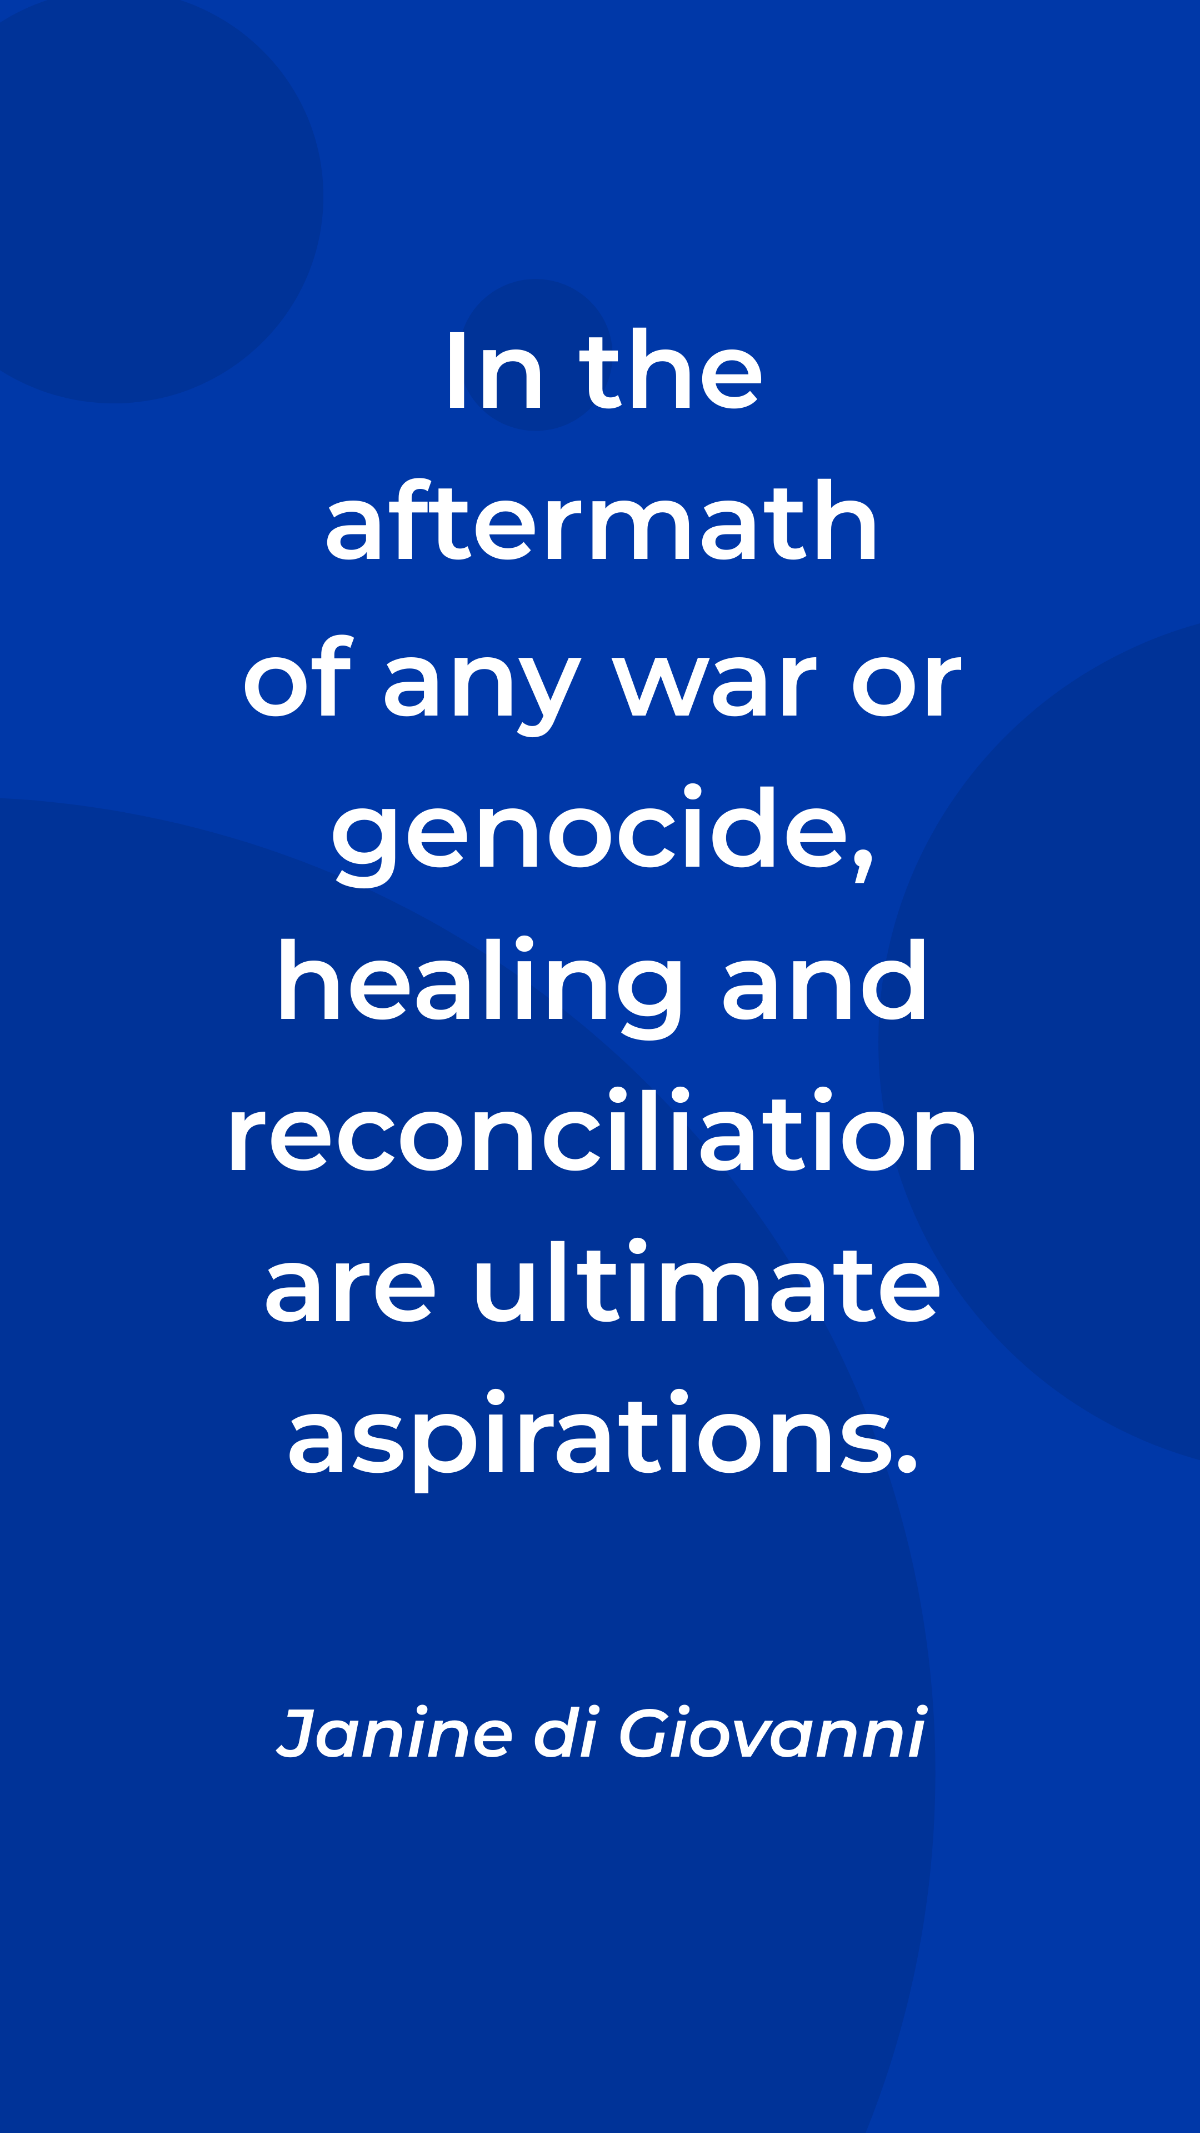 Free Janine di Giovanni - In the aftermath of any war or genocide, healing and reconciliation are ultimate aspirations. Template